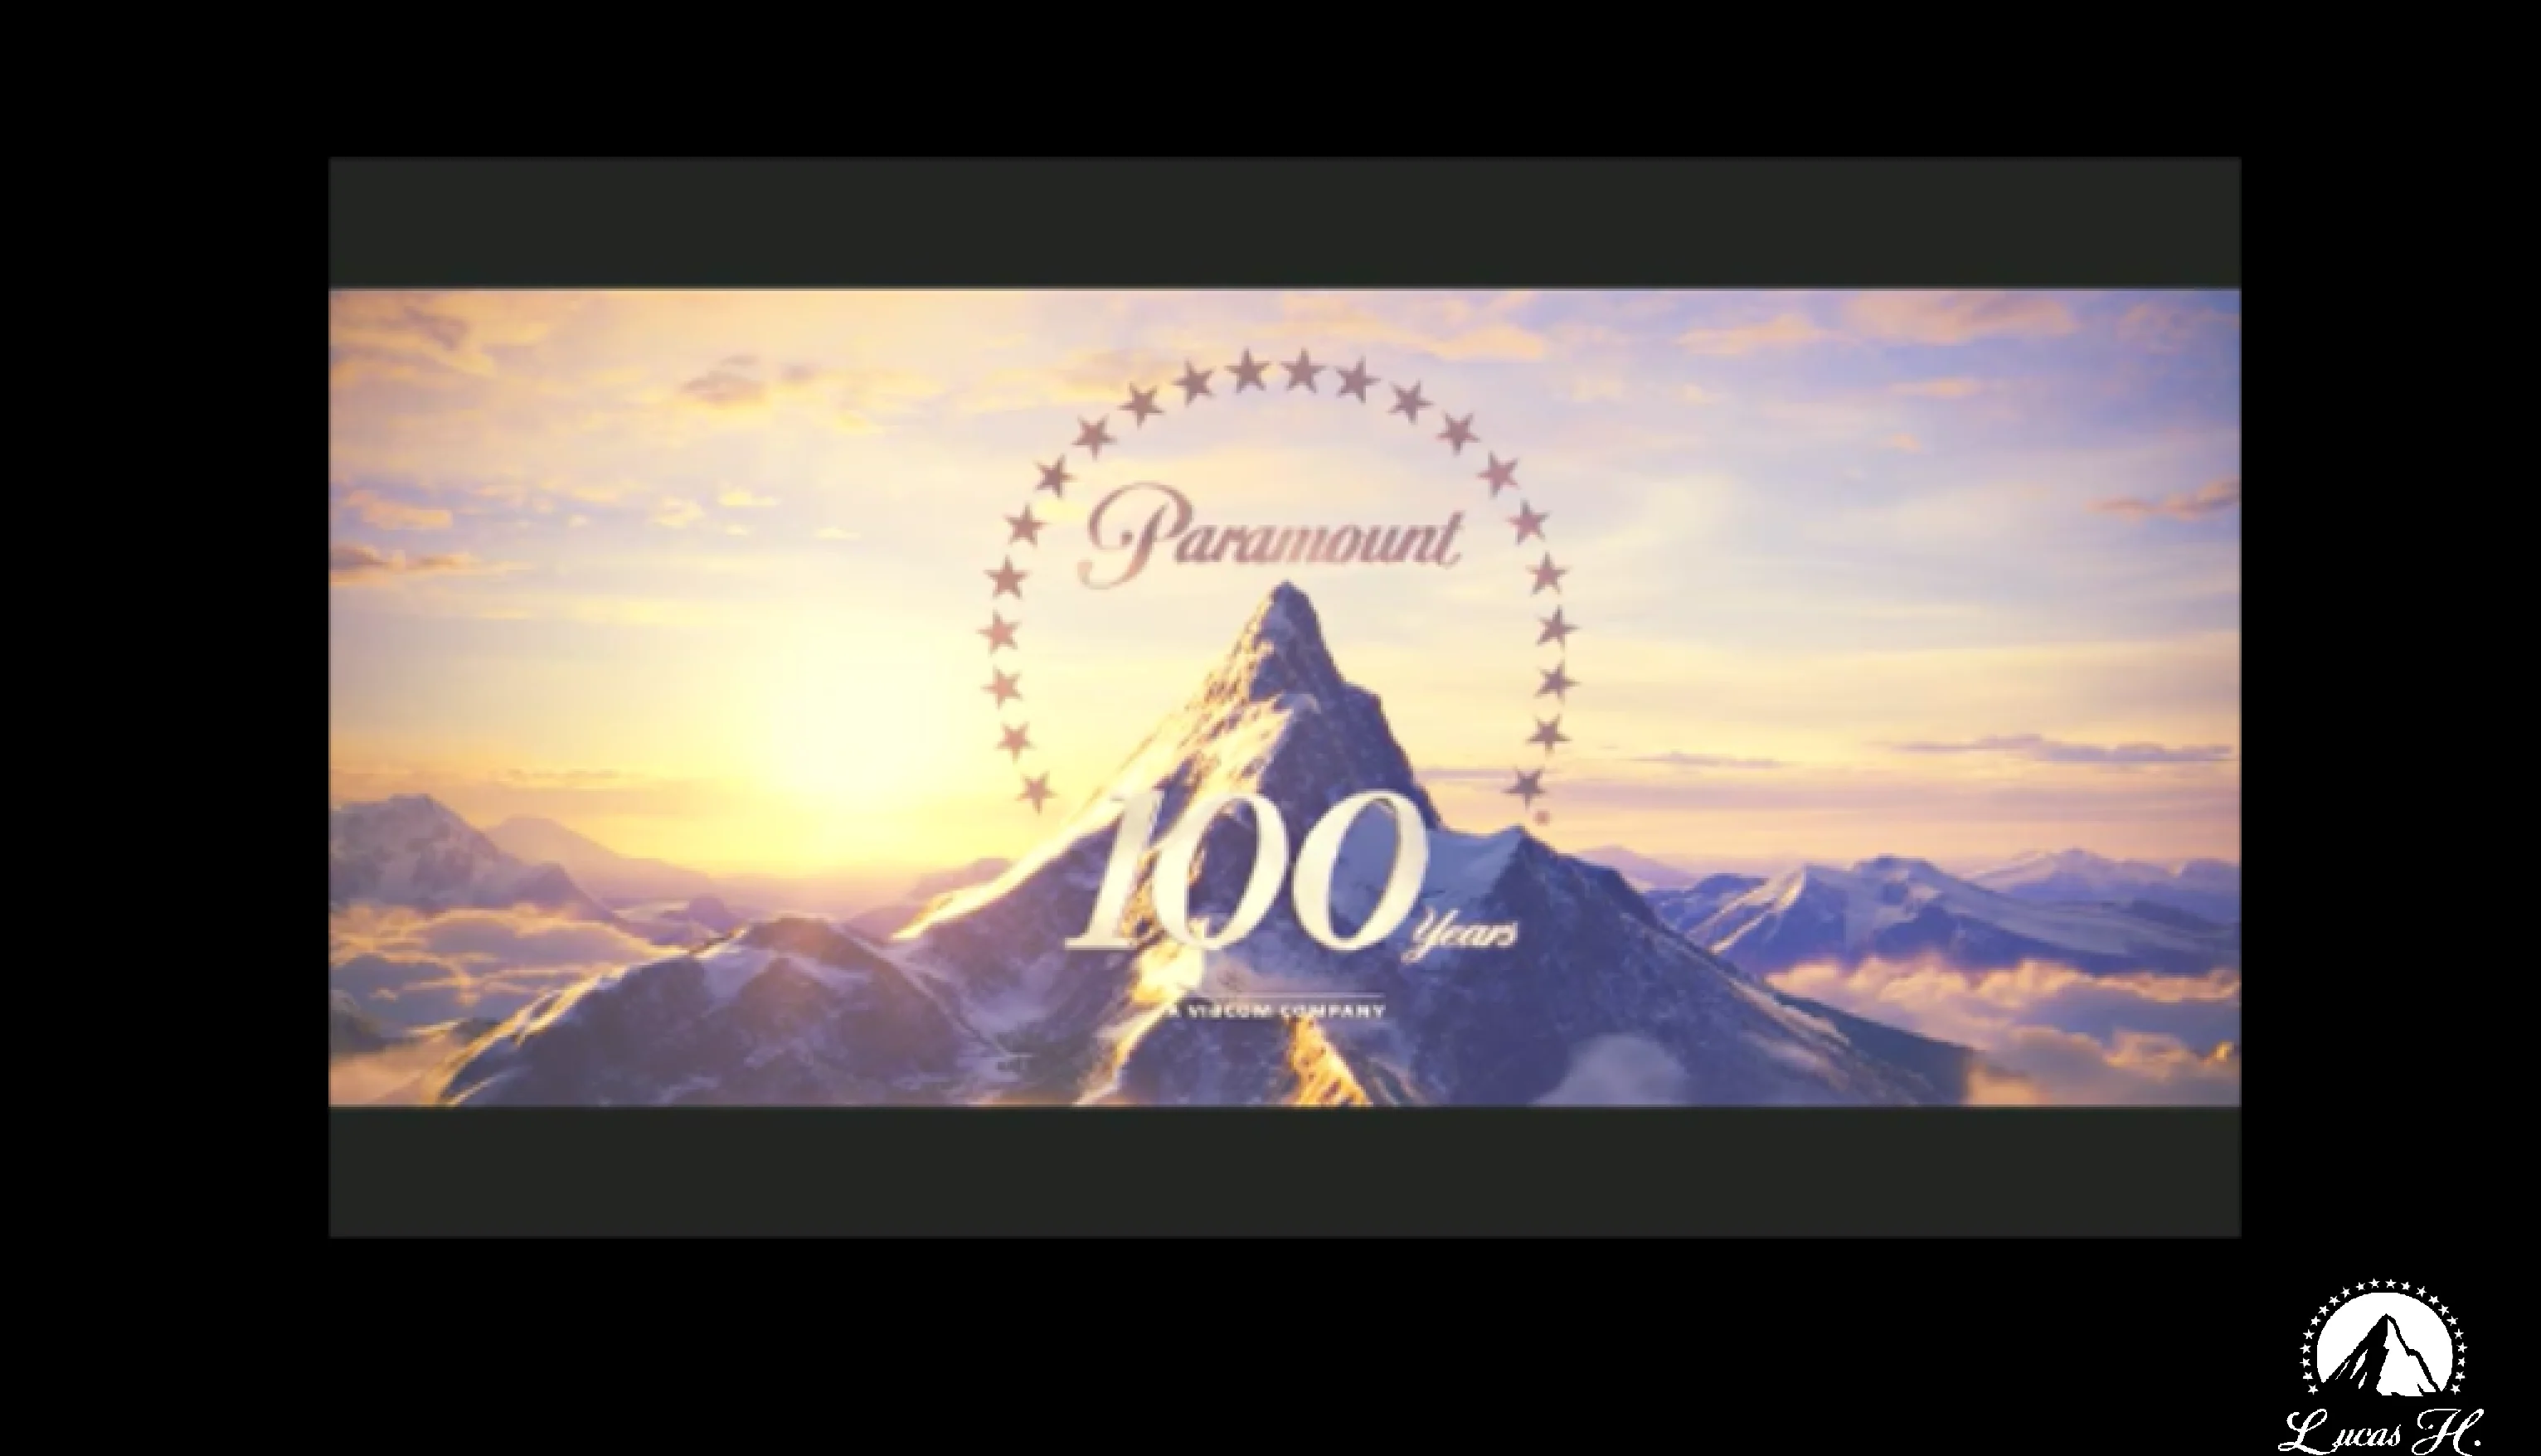 paramount pictures logo 100 years